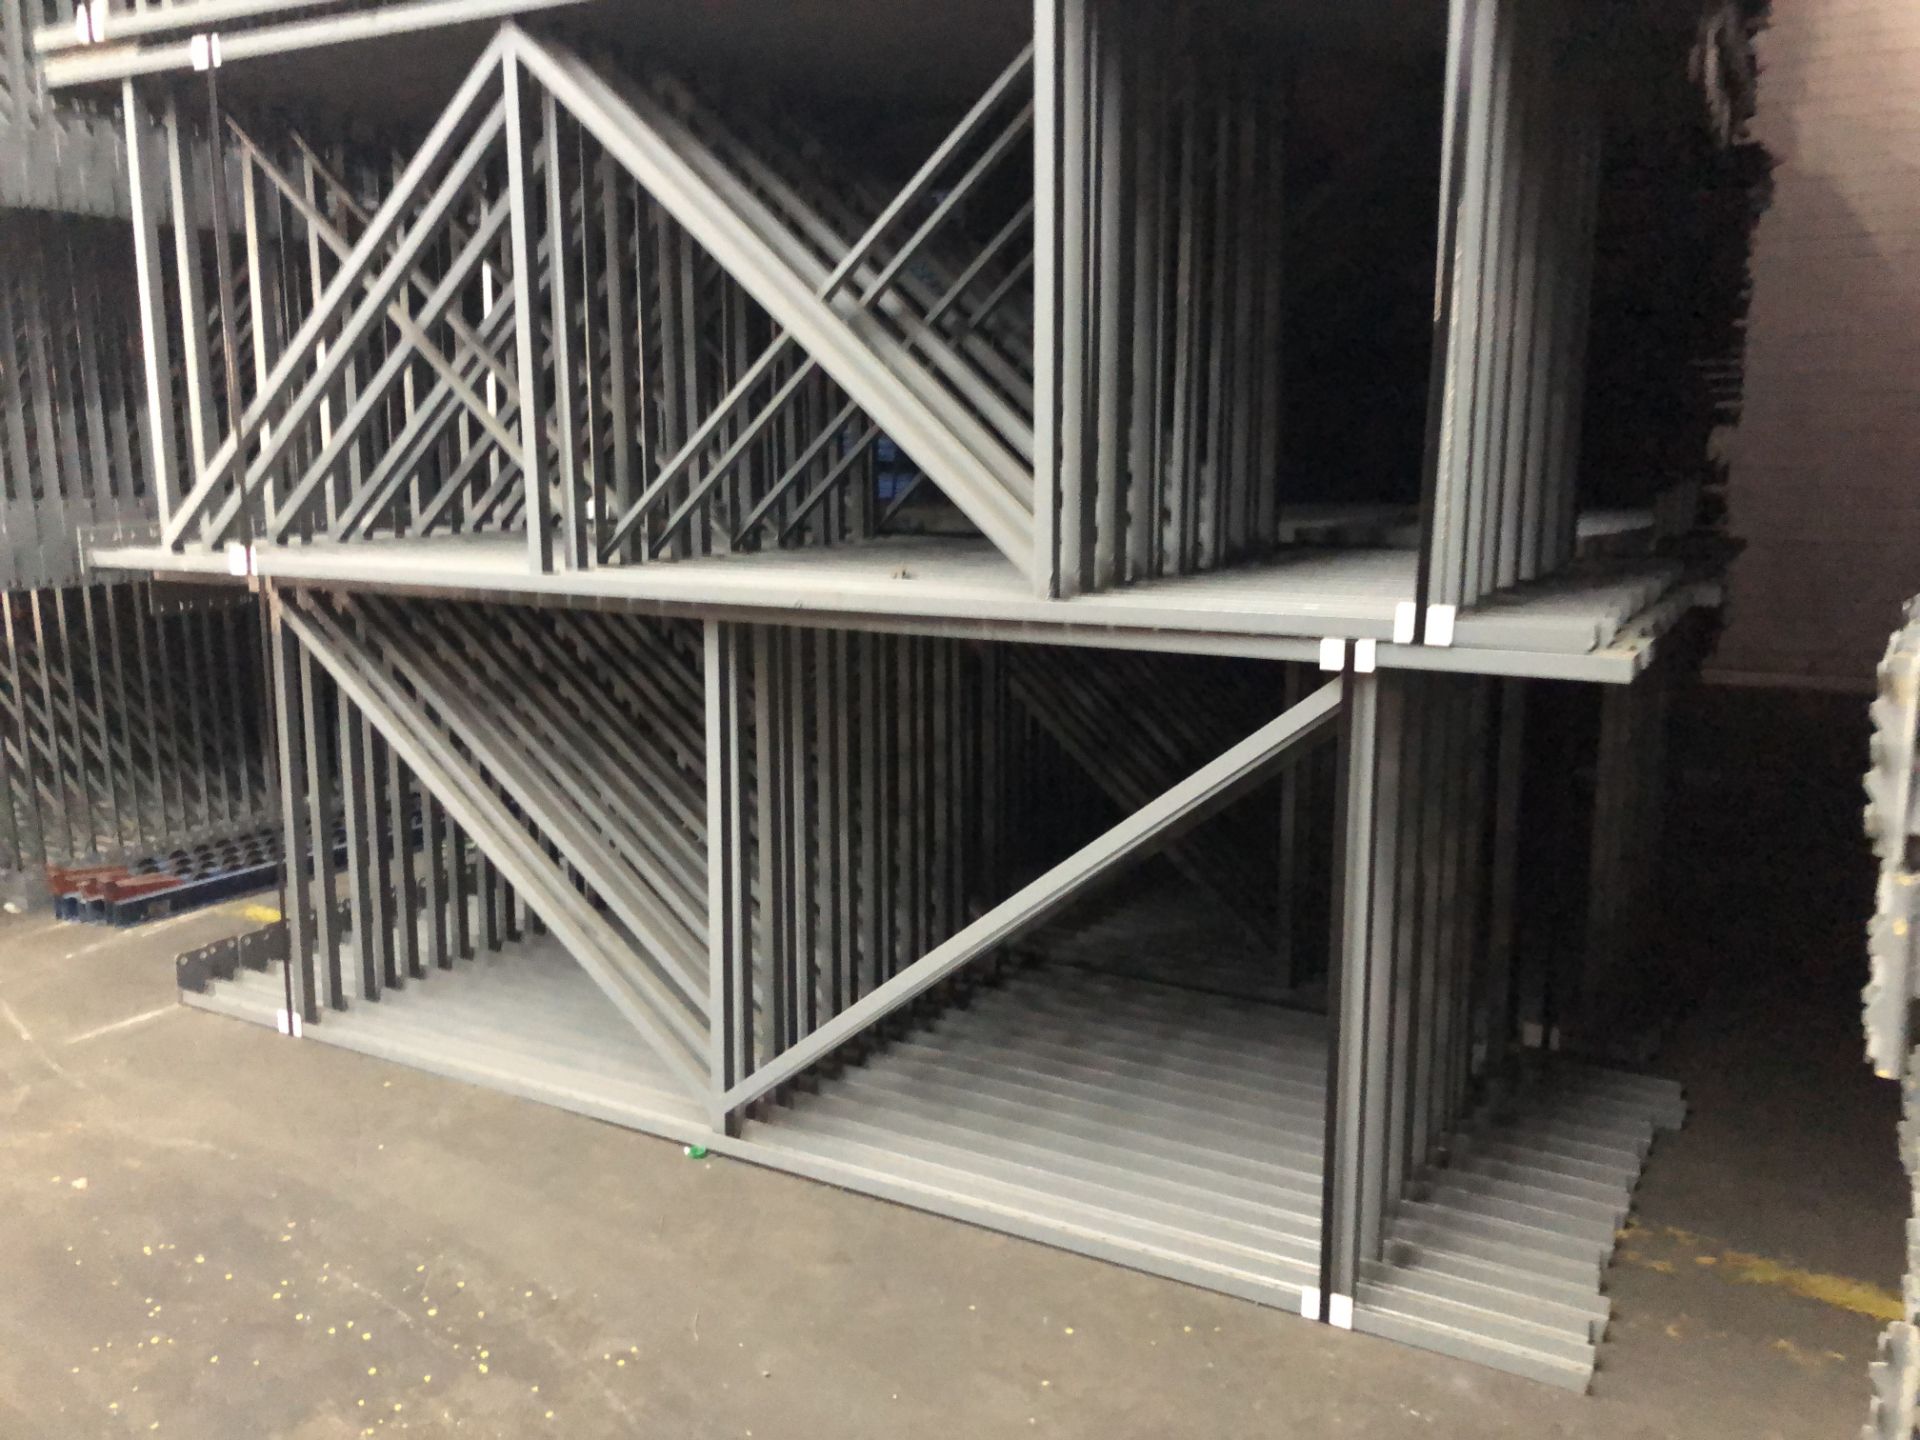 9 BAYS OF 10.5'H X 42"D X 102"L STRUCTURAL STYLE PALLET RACKS - Image 3 of 4